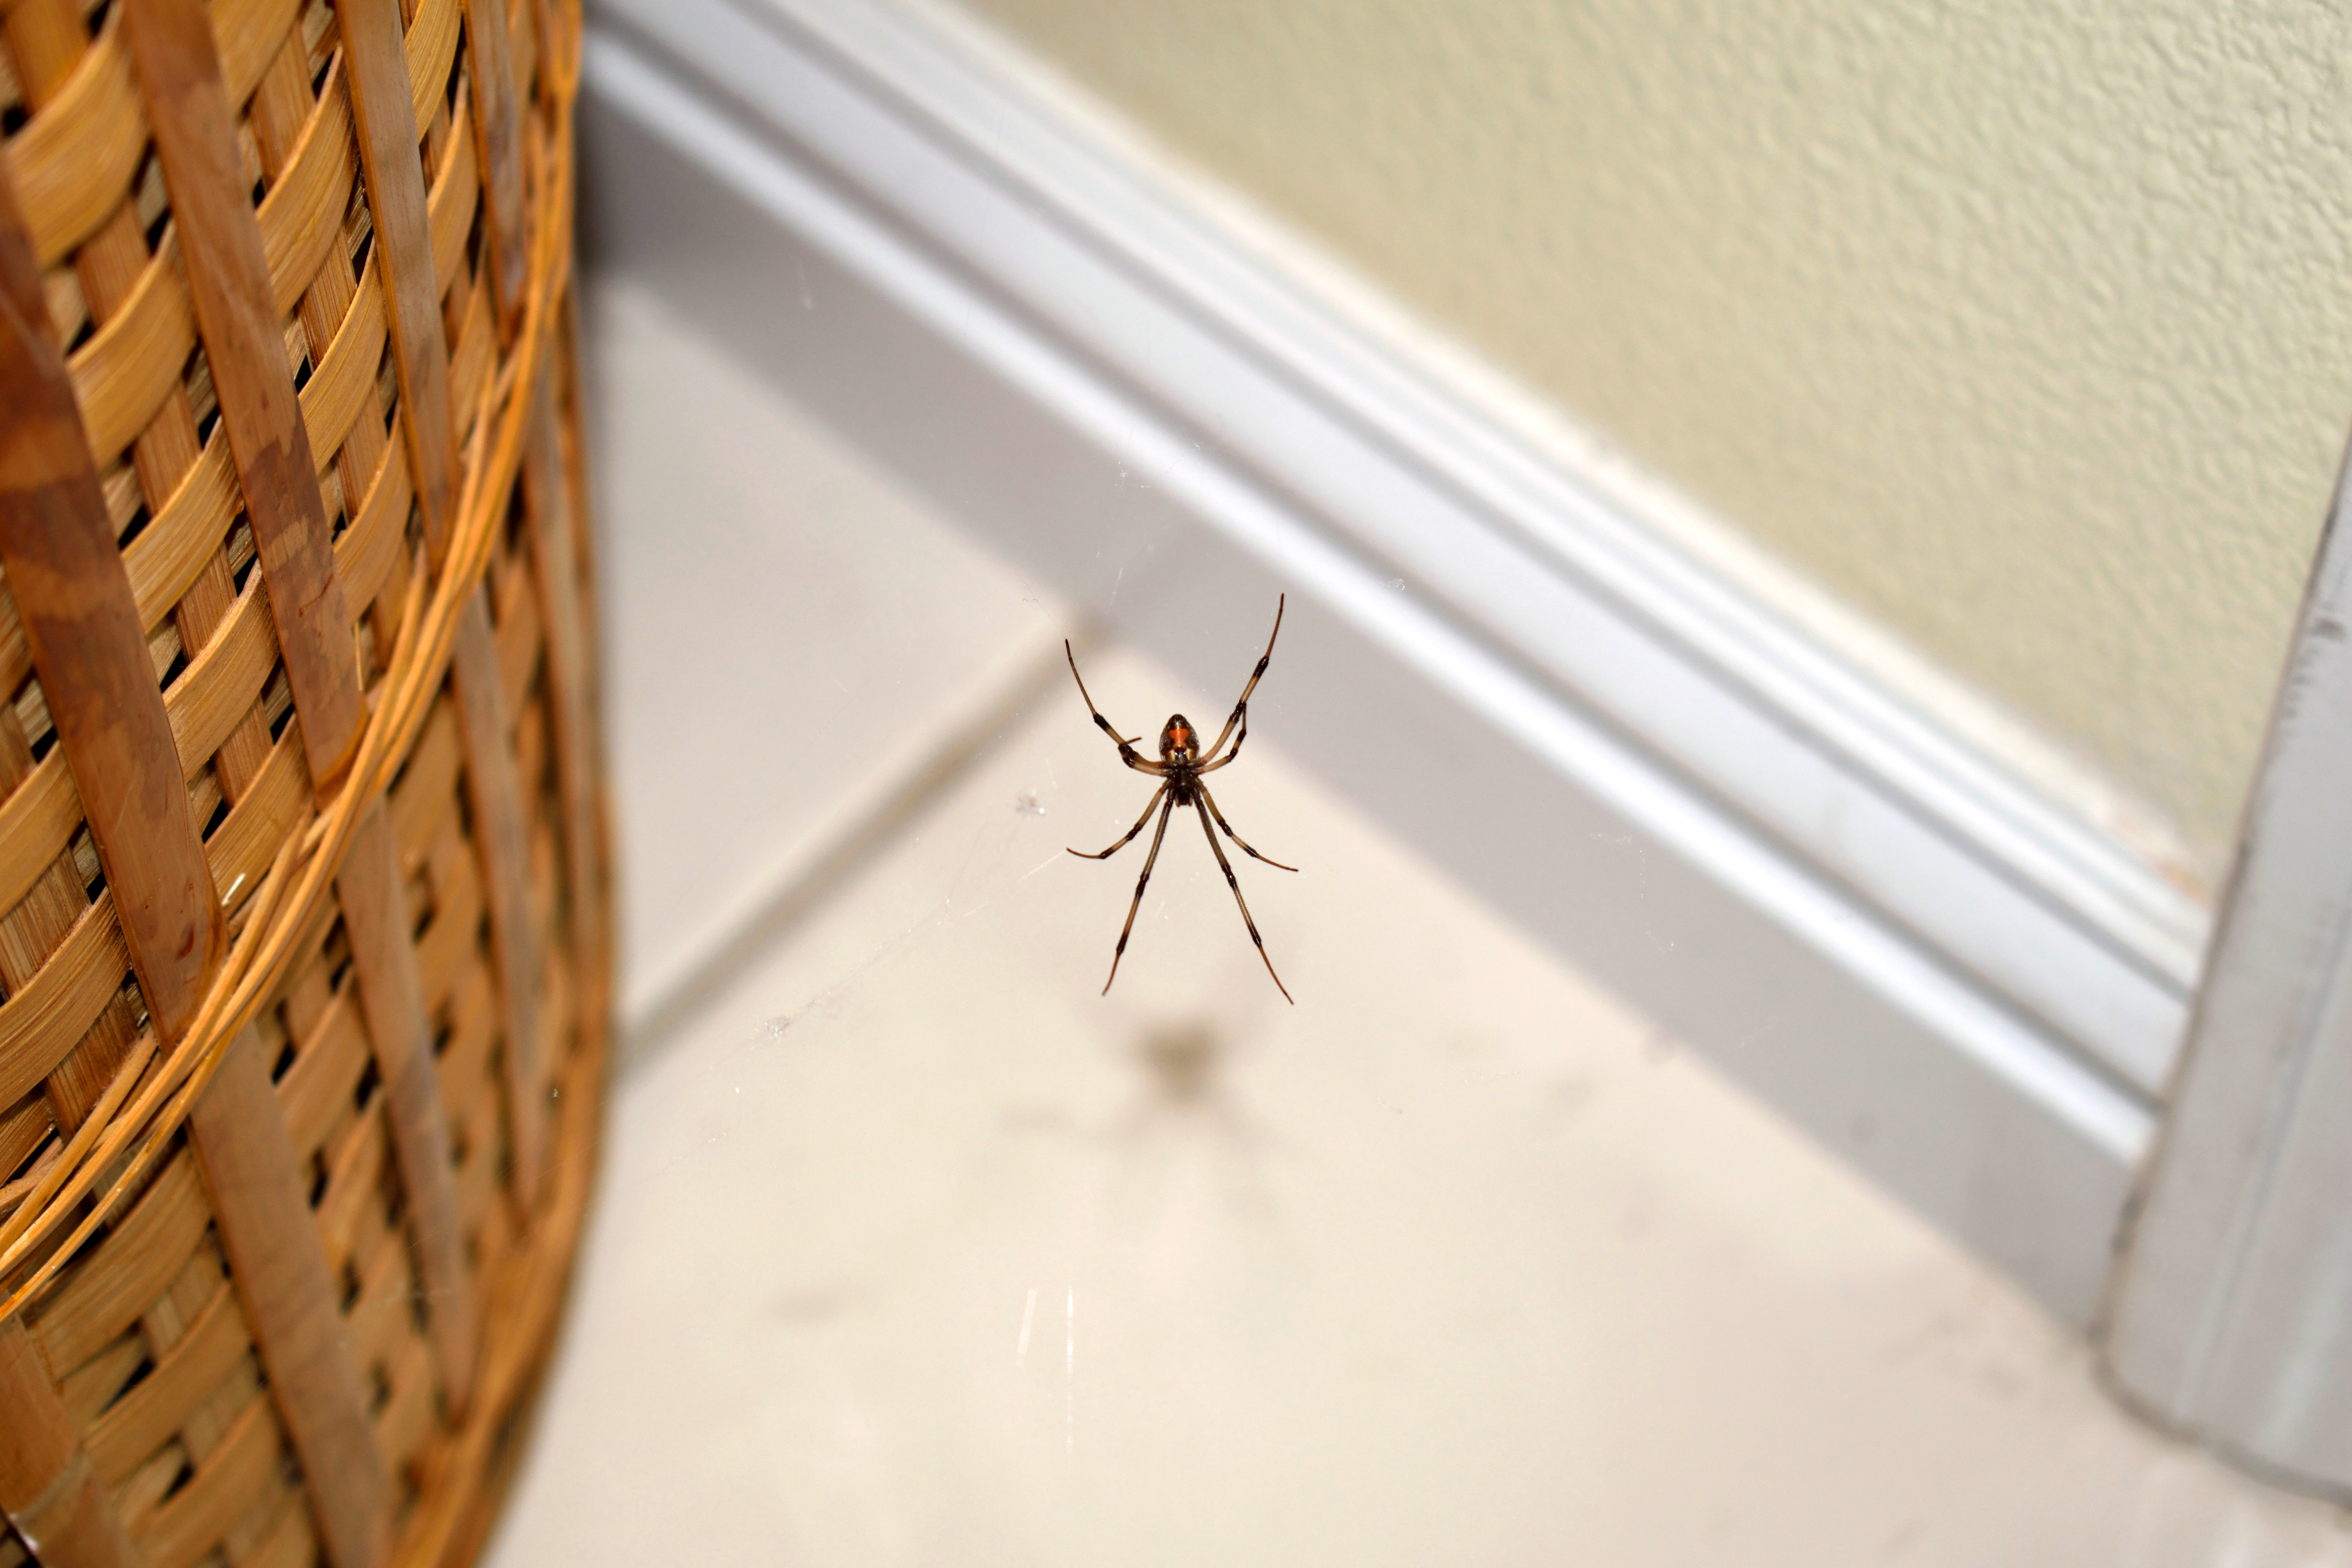 clothes basket against beige wall and spider web with black widow on it